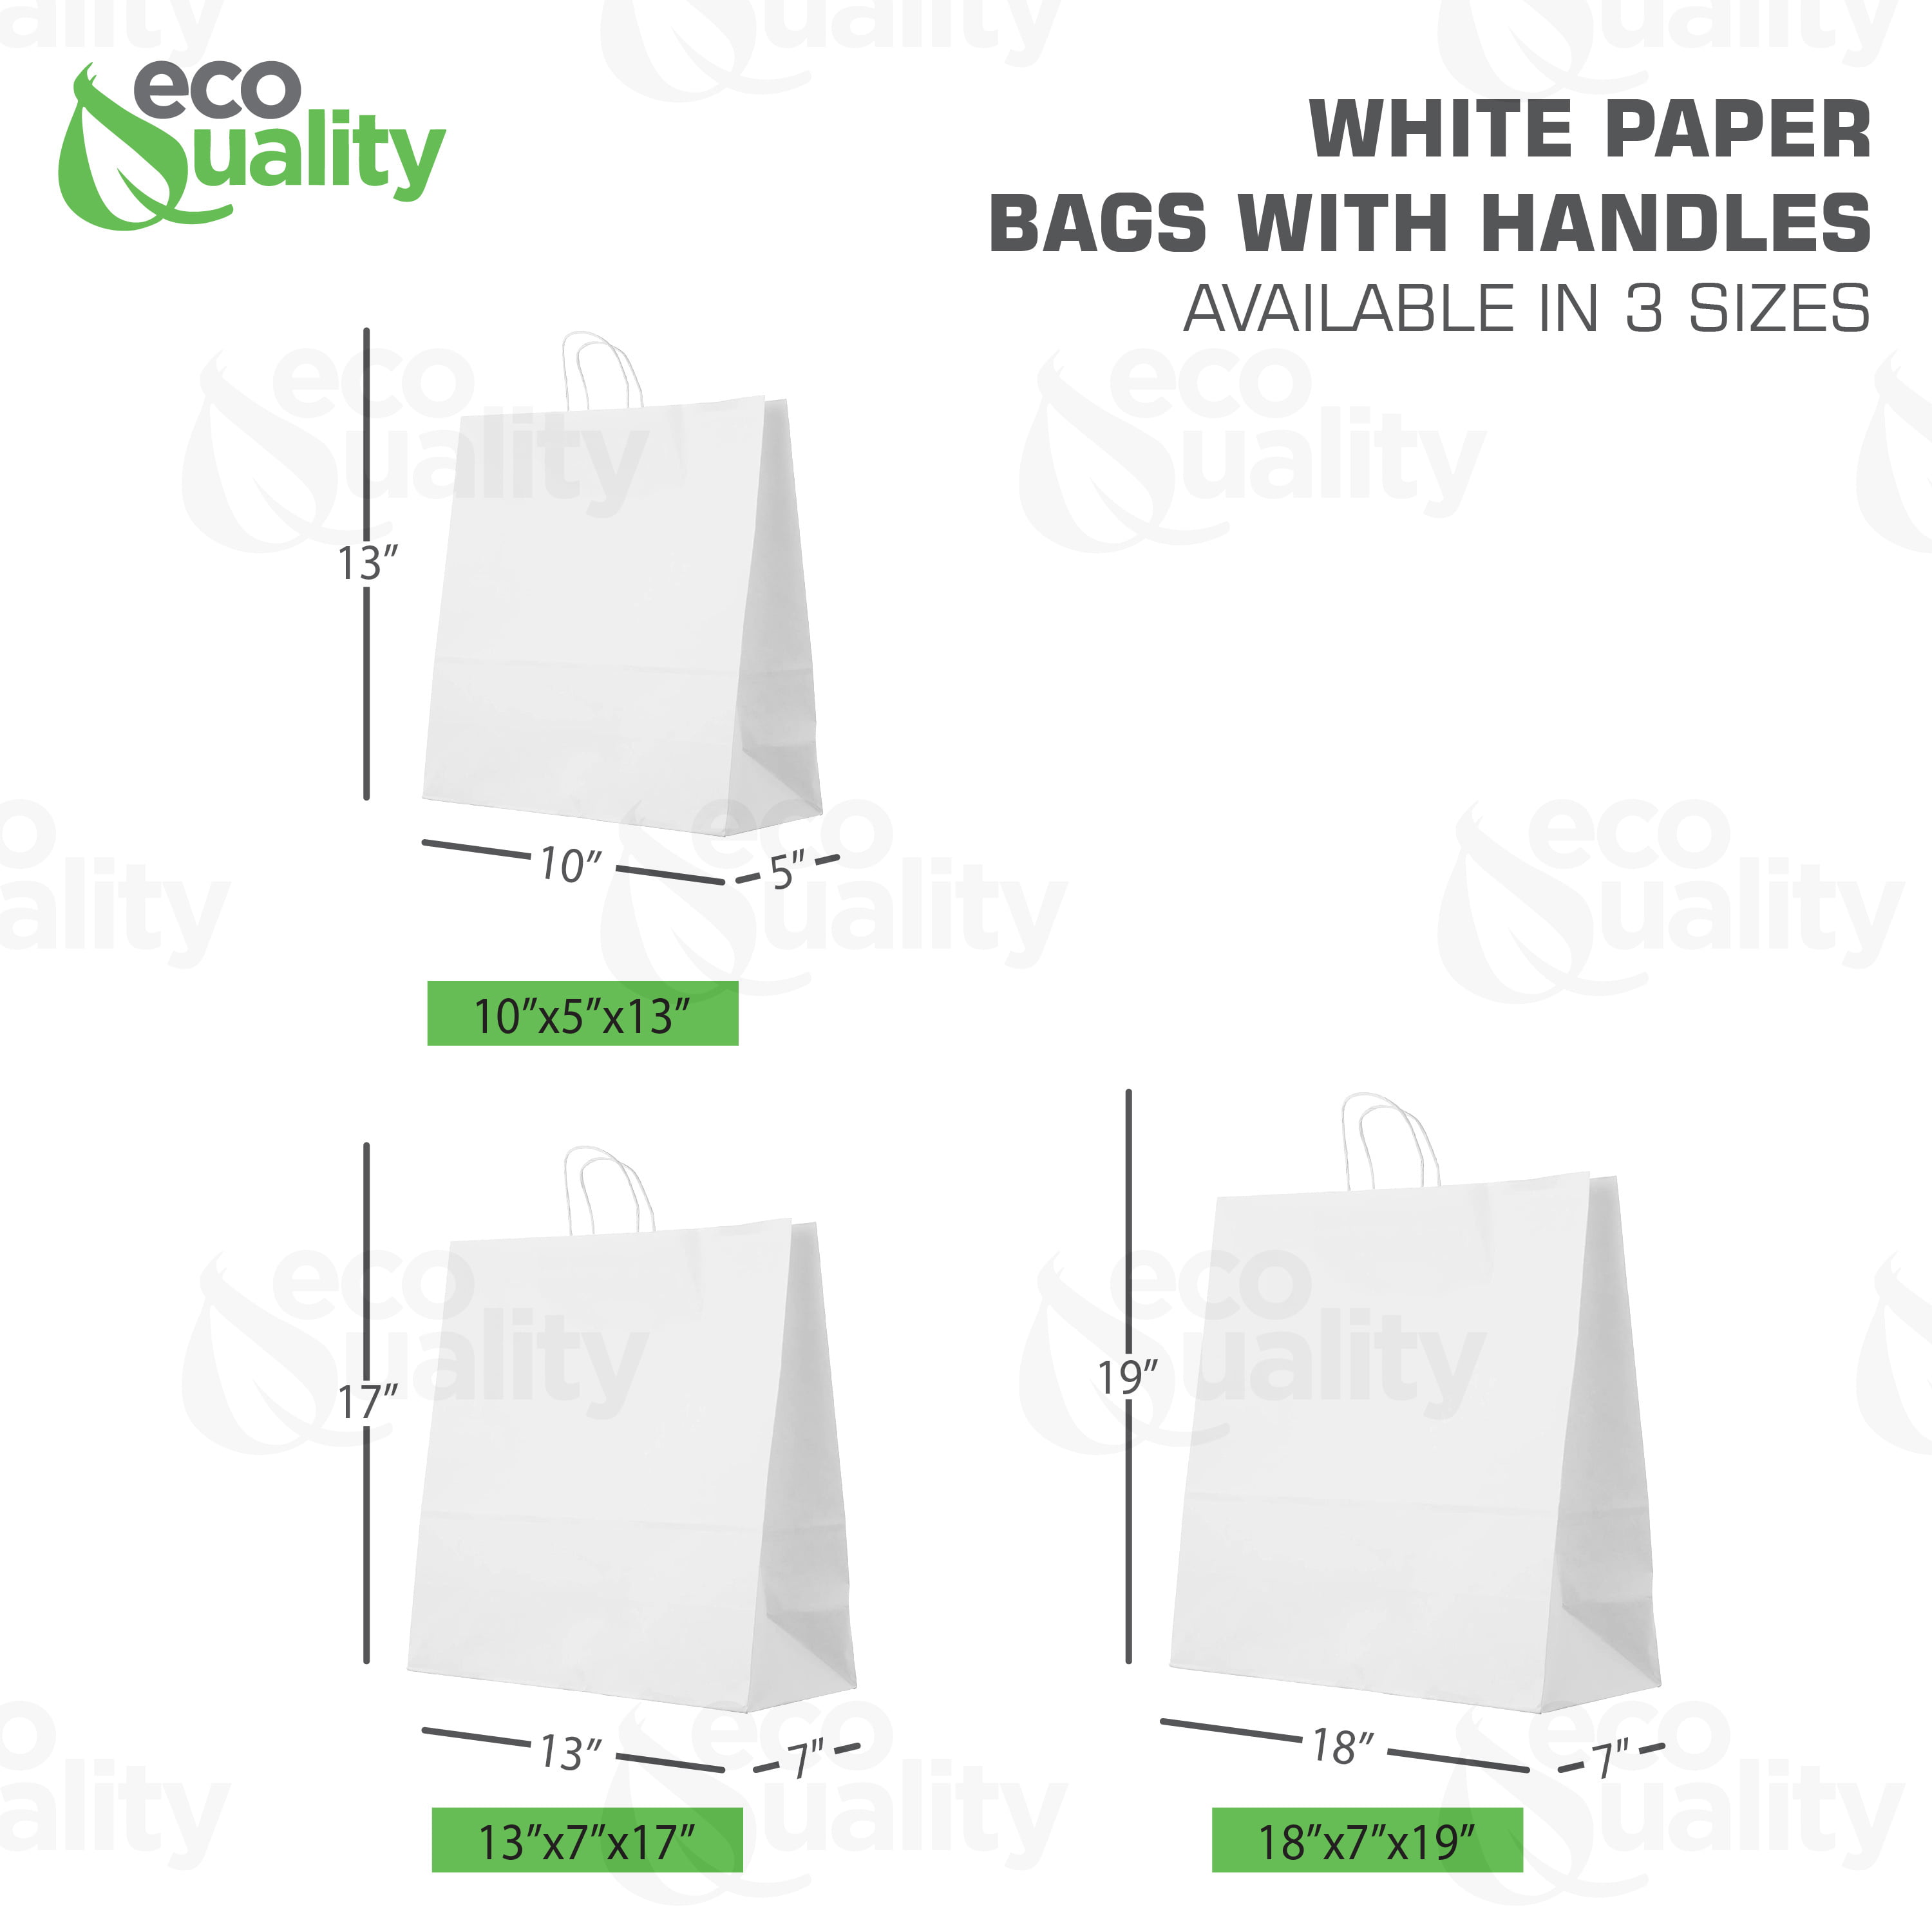 School Smart Paper Bag, Flat Bottom, 7 x 13 Inches, White, Pack of 50